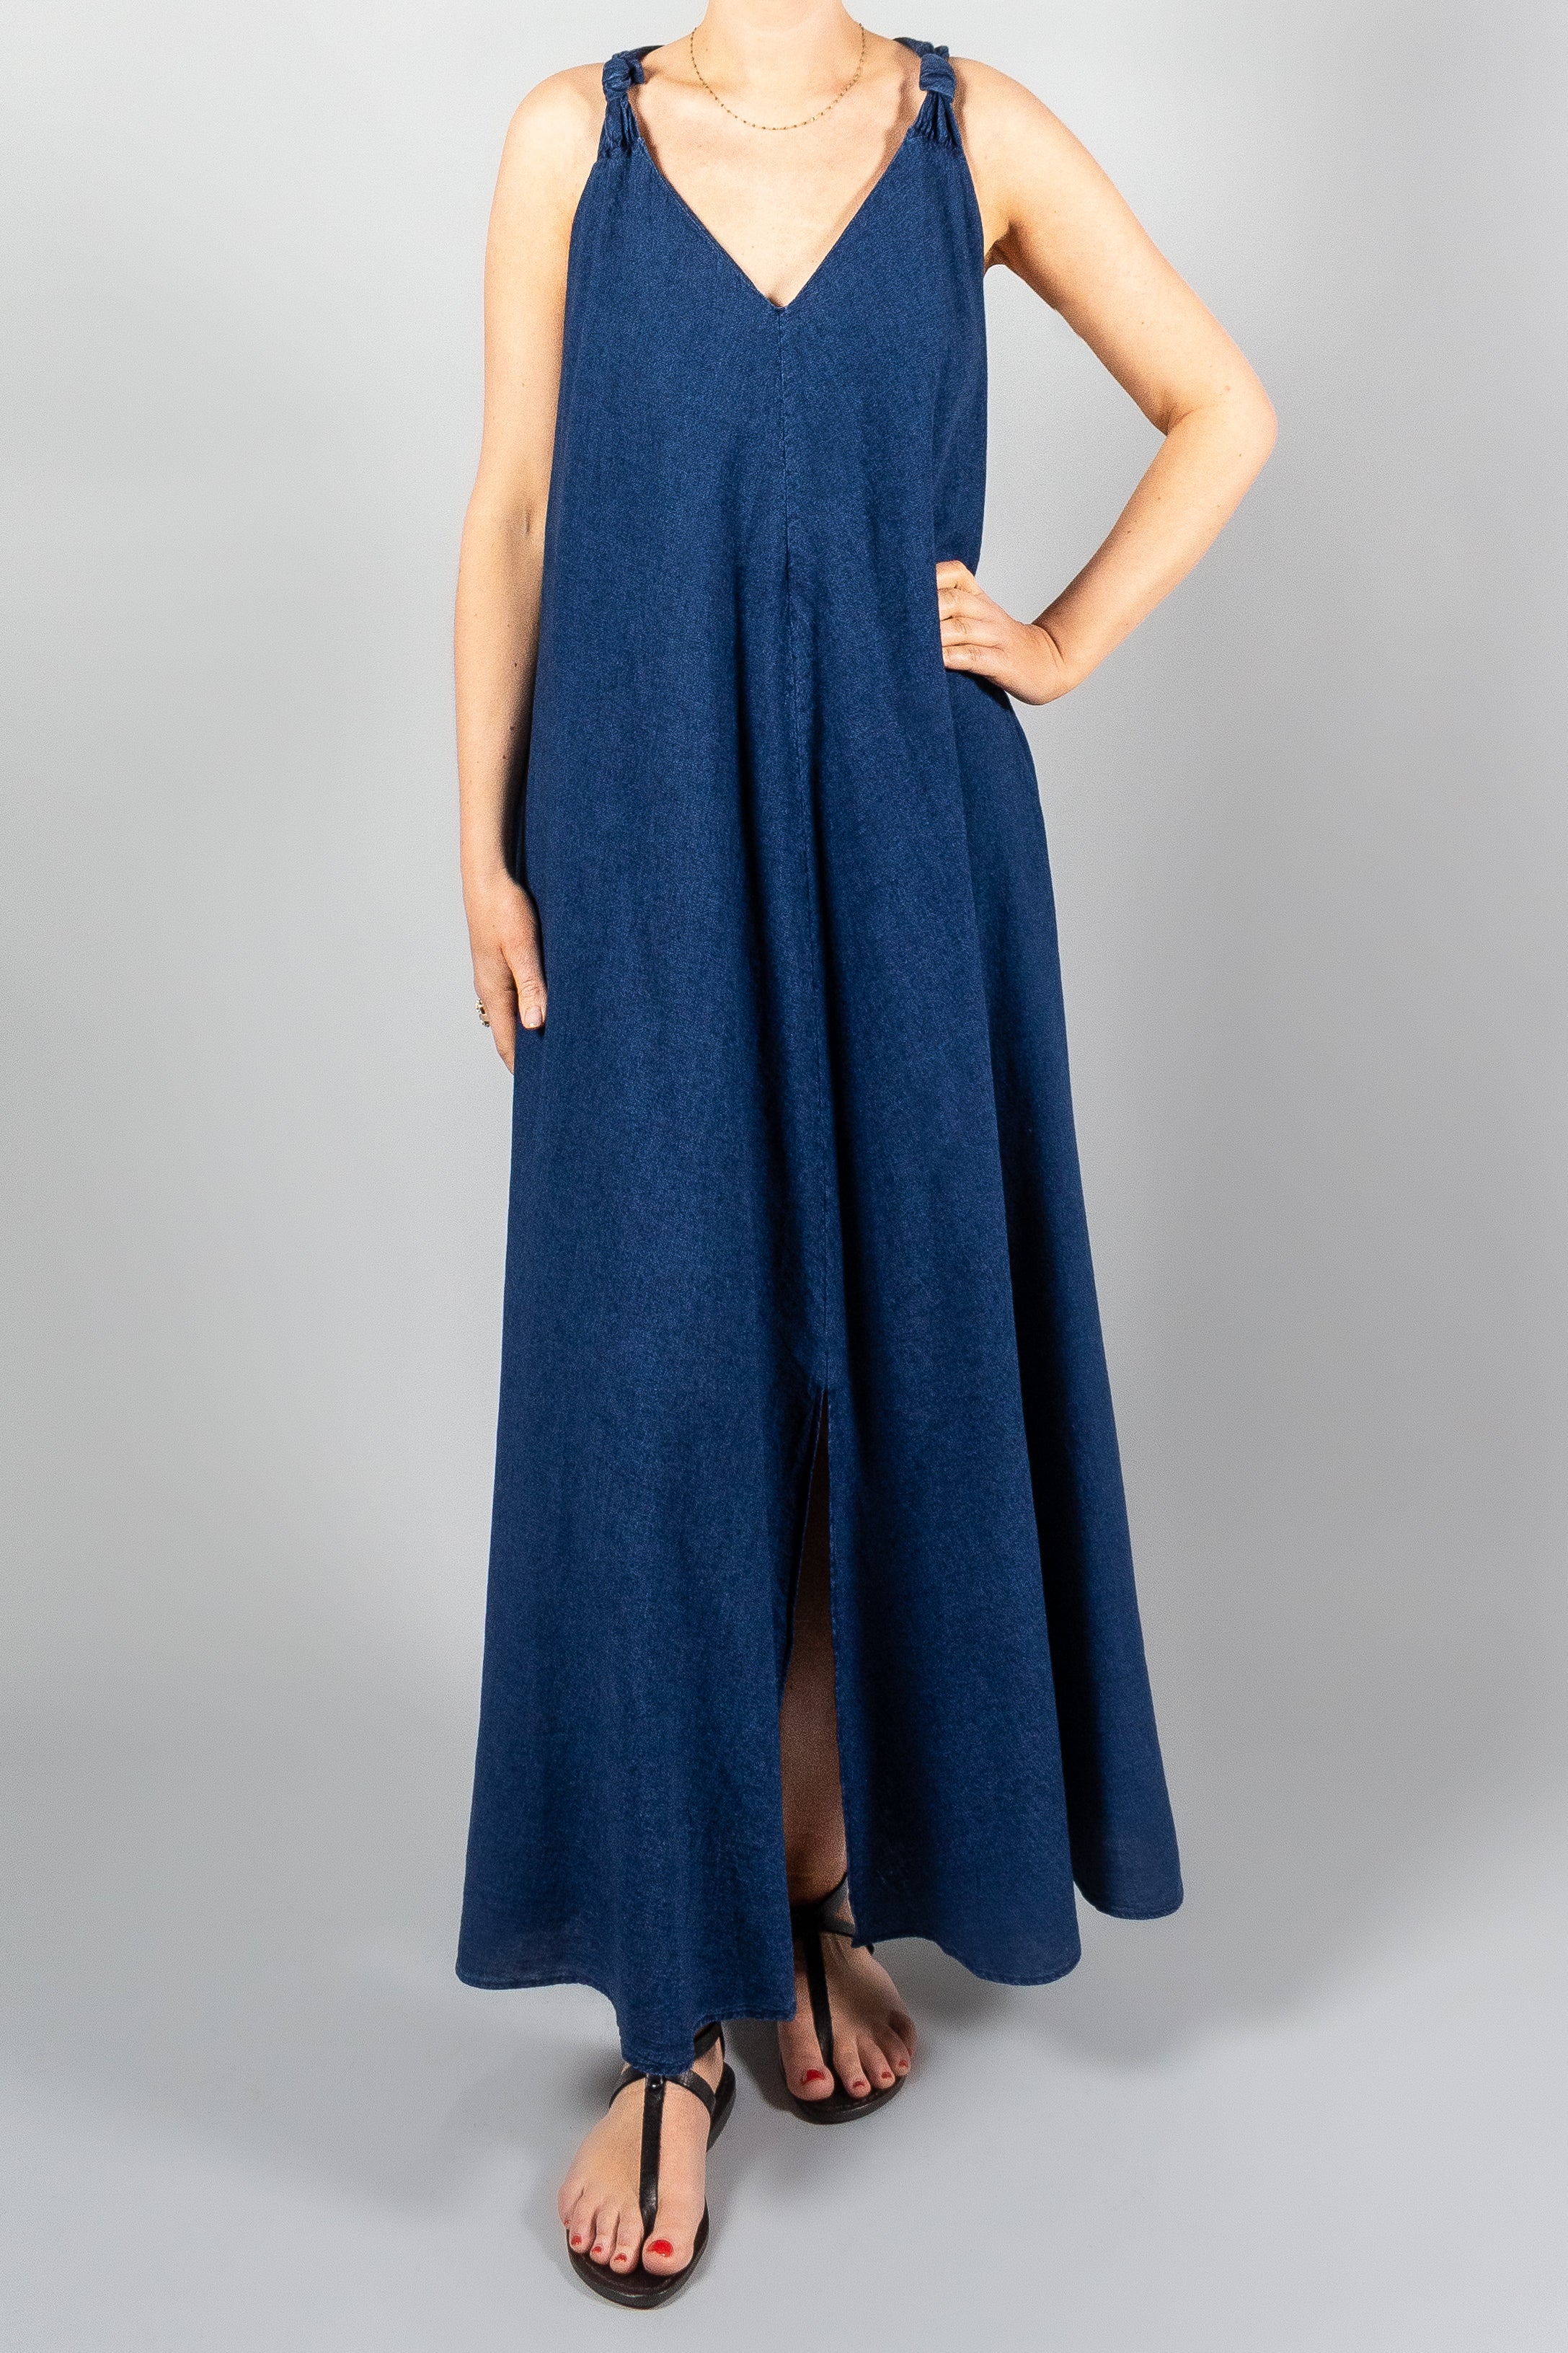 Closed Knotted Maxi Dress-Dresses and Jumpsuits-Misch-Boutique-Vancouver-Canada-misch.ca